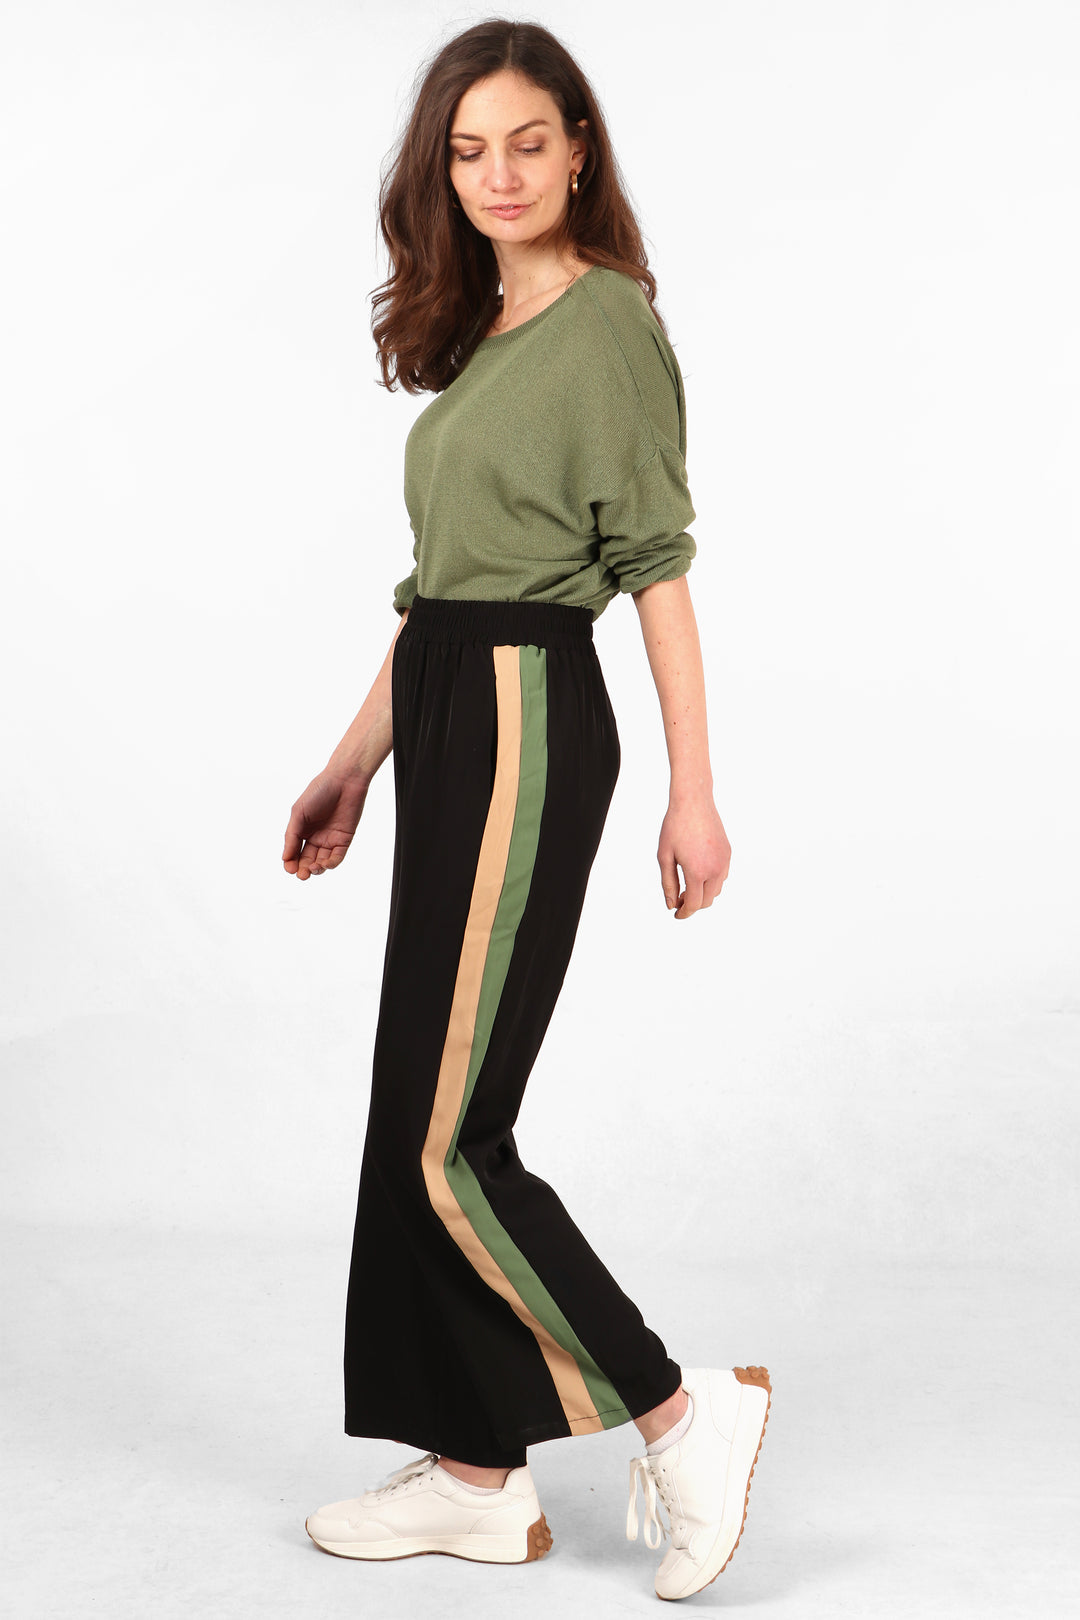 model wearing long black trousers withbeige and khaki stripes running the length of the leg at the side of the trousers